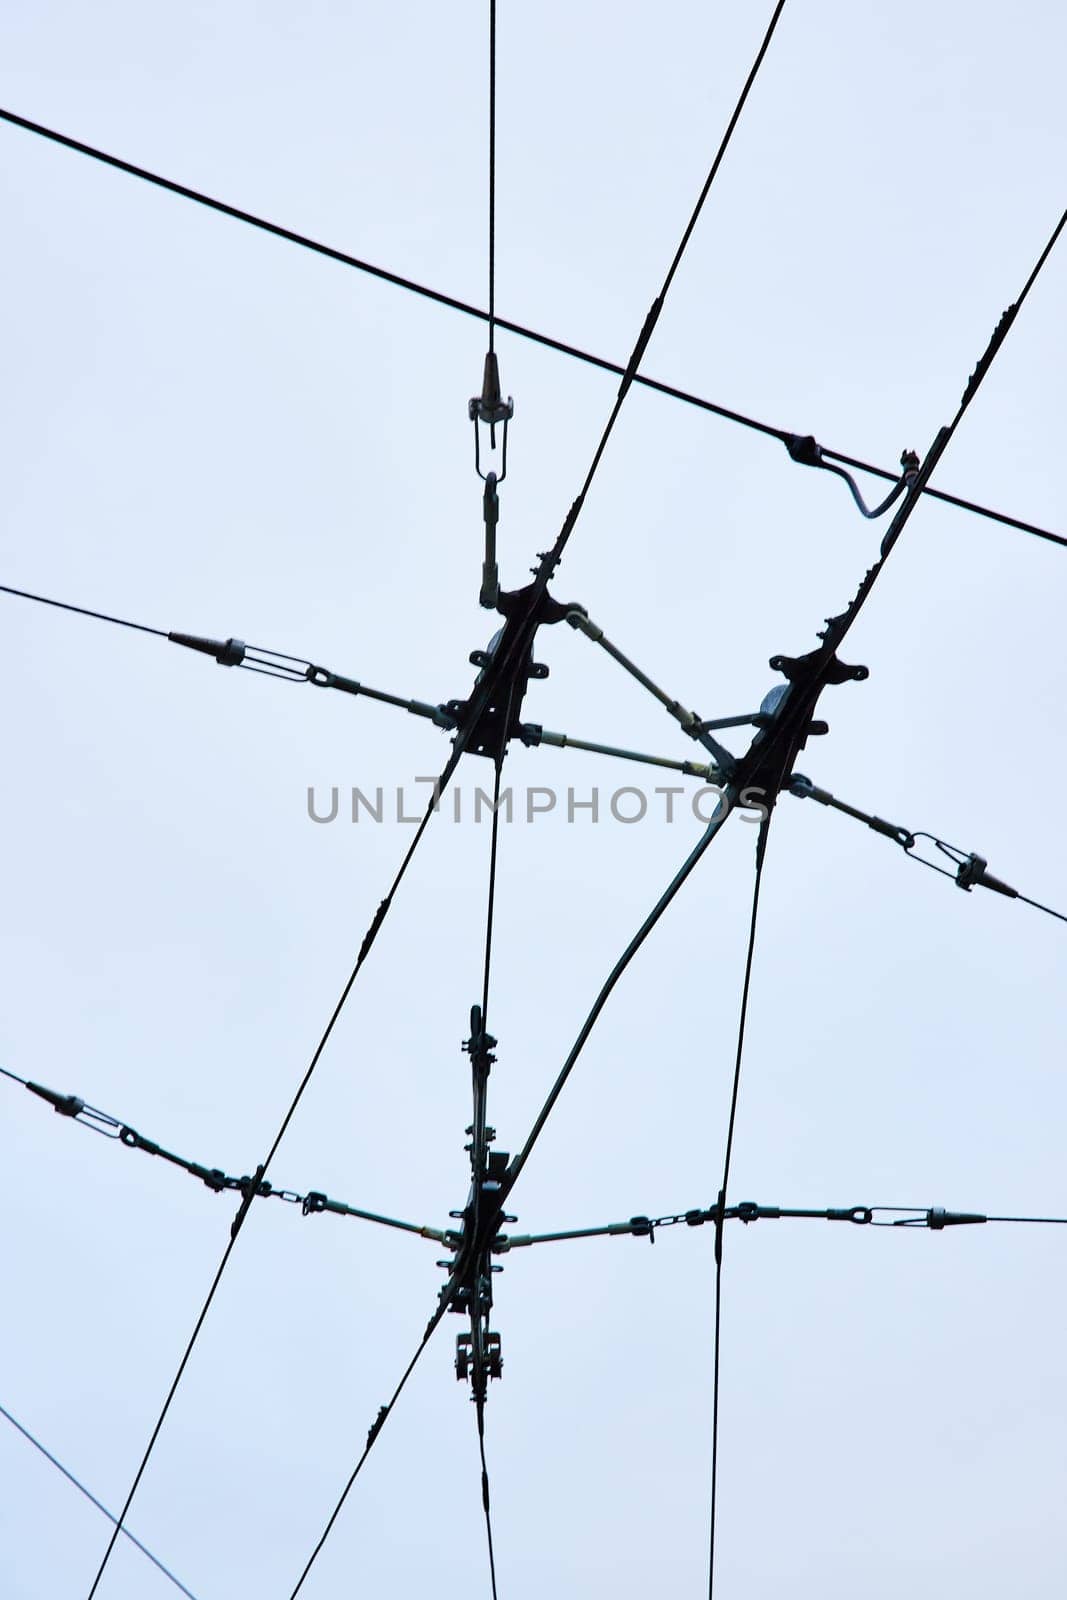 Wires for city transportation clean electric energy upward abstract view with overcast sky by njproductions